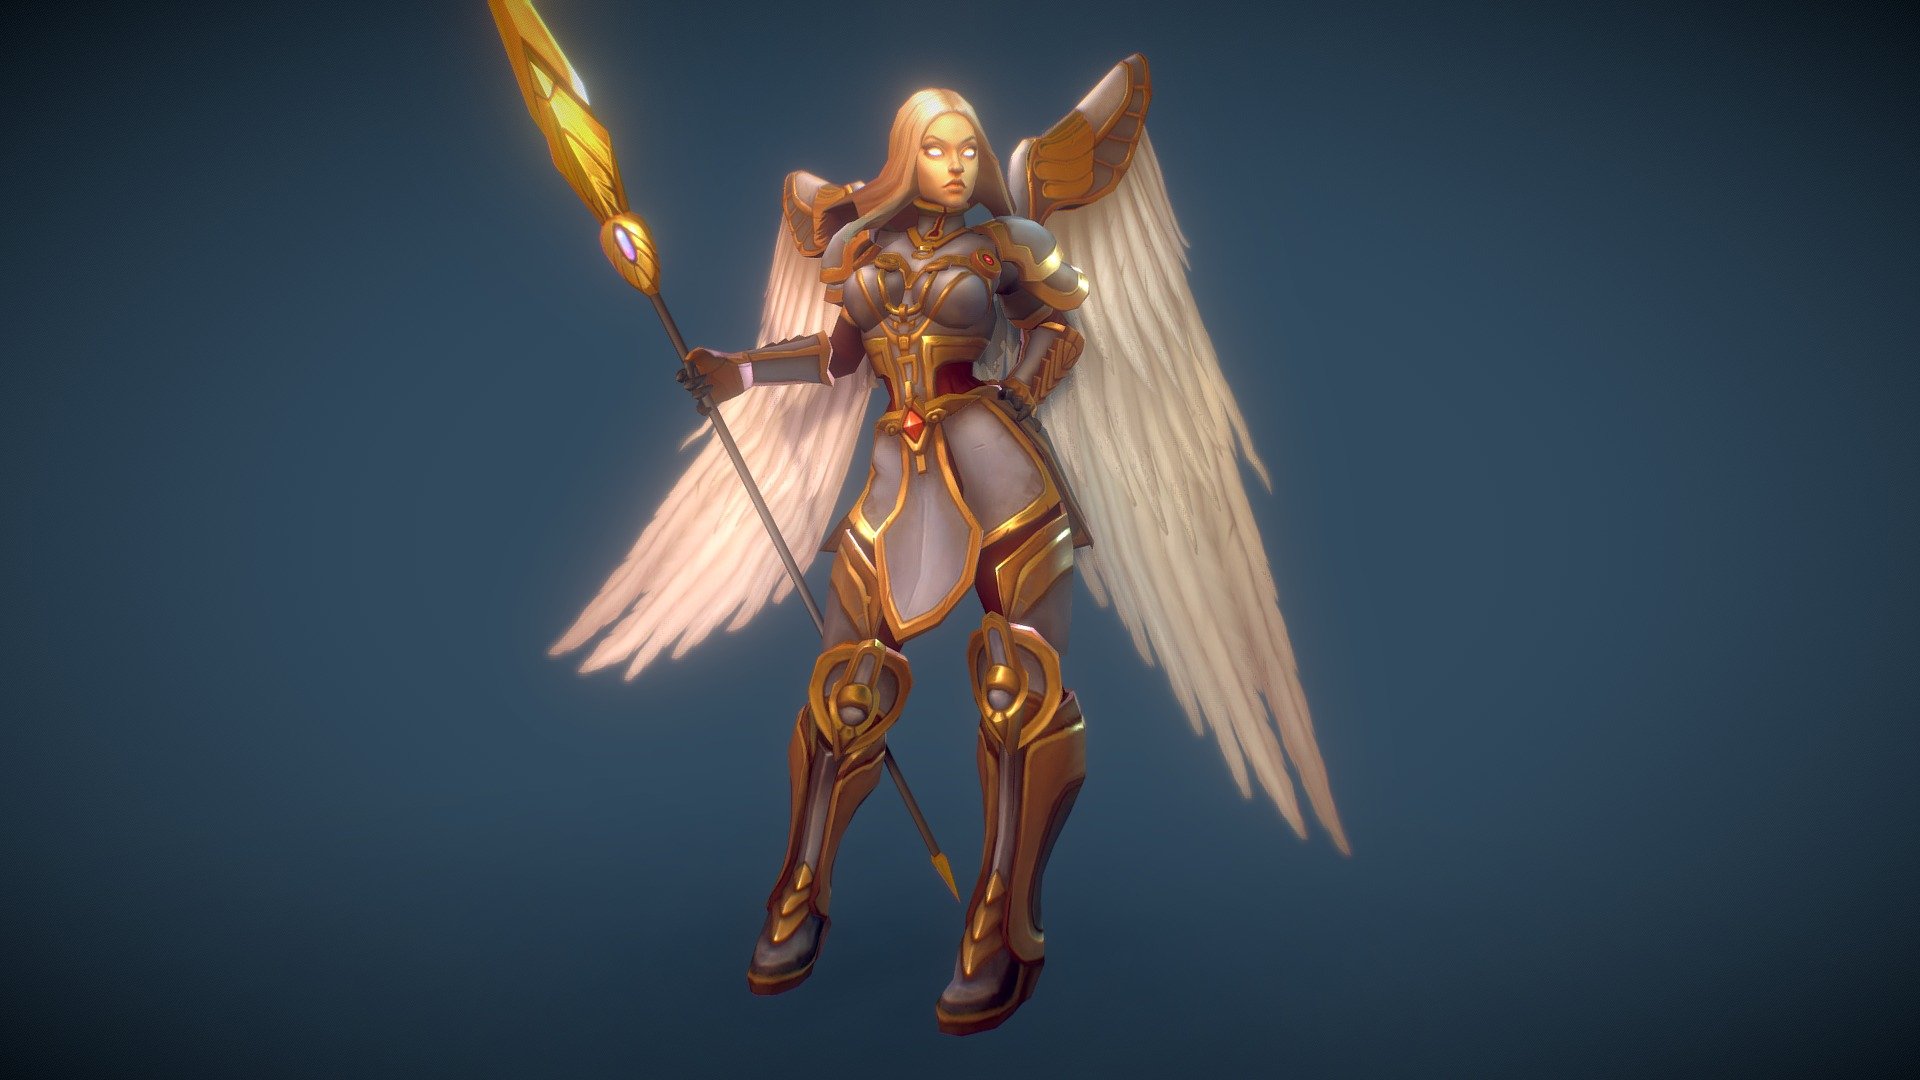 A low poly, hand painted angel player or NPC character for your game project. She is rigged and ready to be animated 3d model